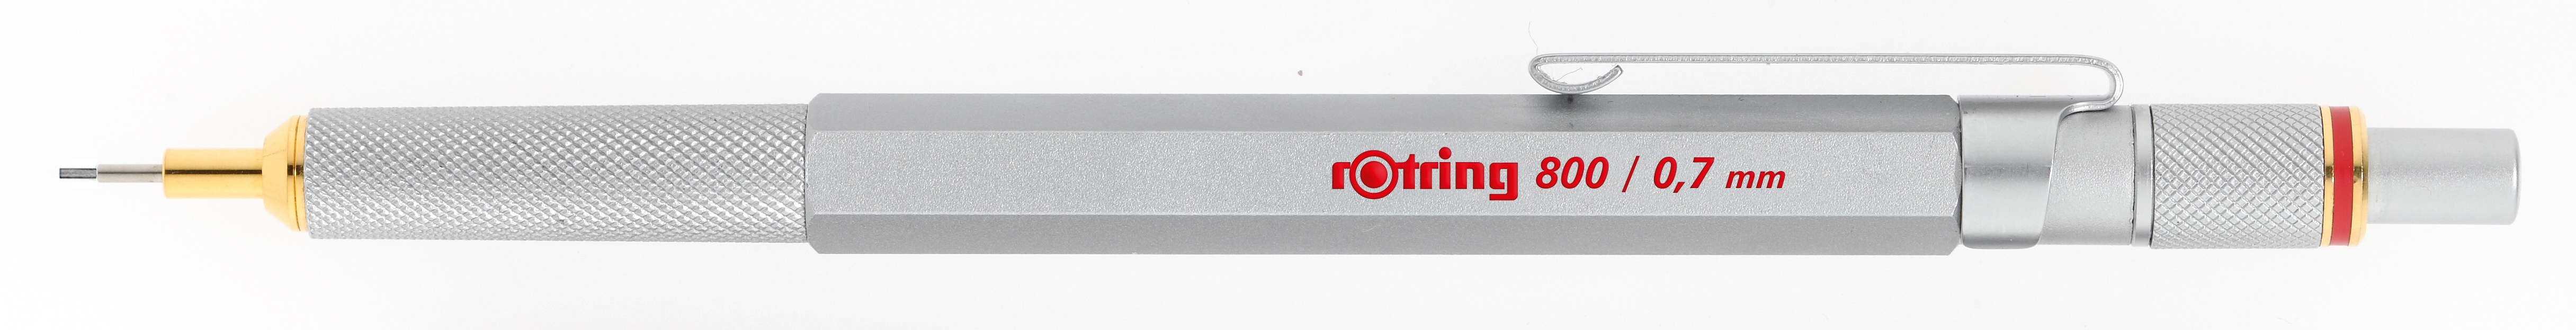 ROTRING Porte-mines 0,7mm 1904448 argent